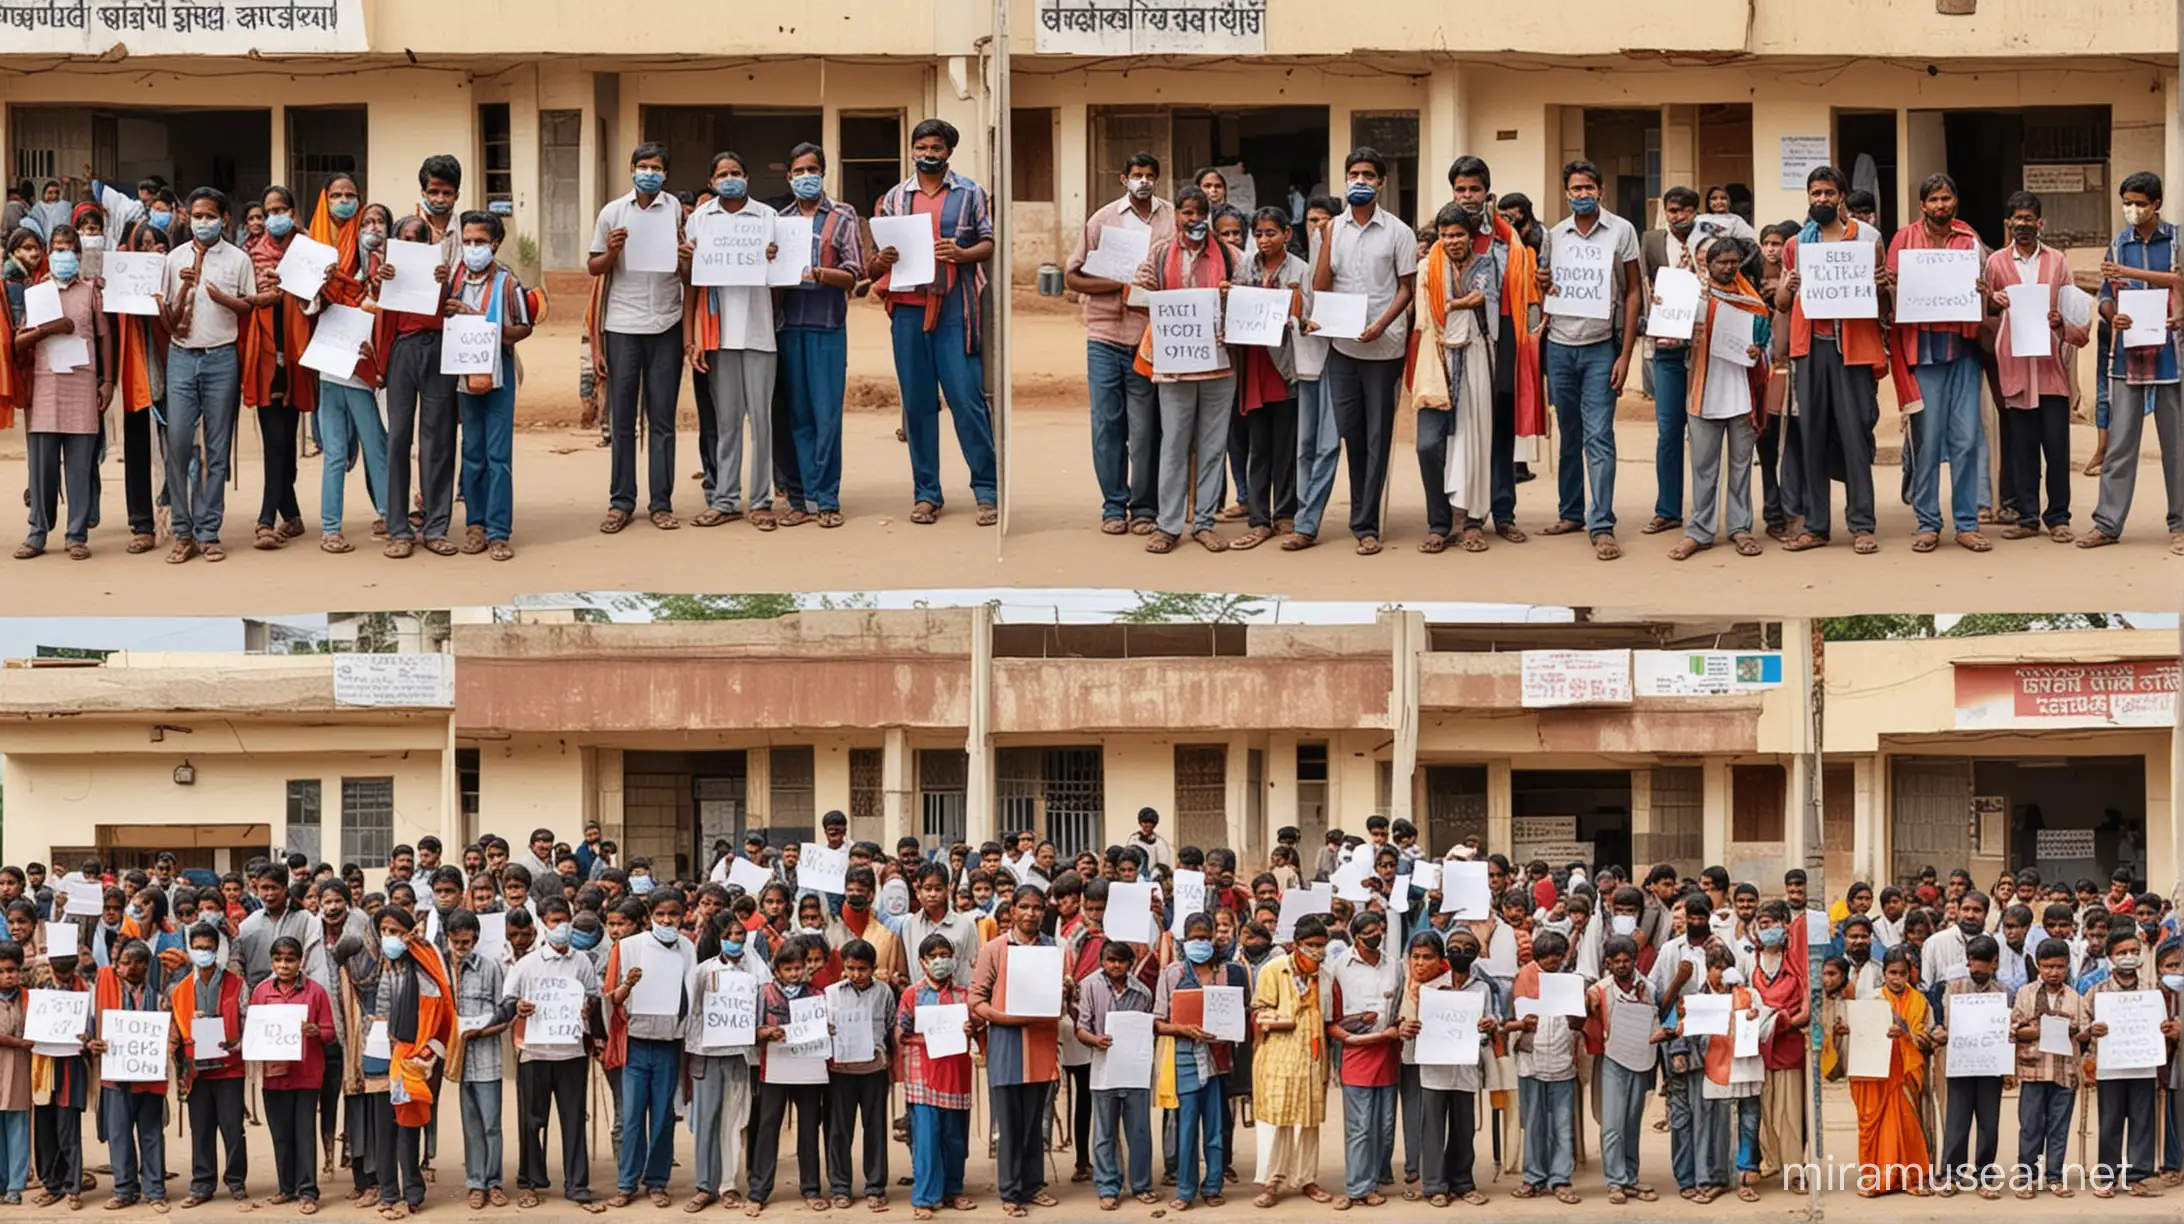 Indians people going to voting  in schools collages